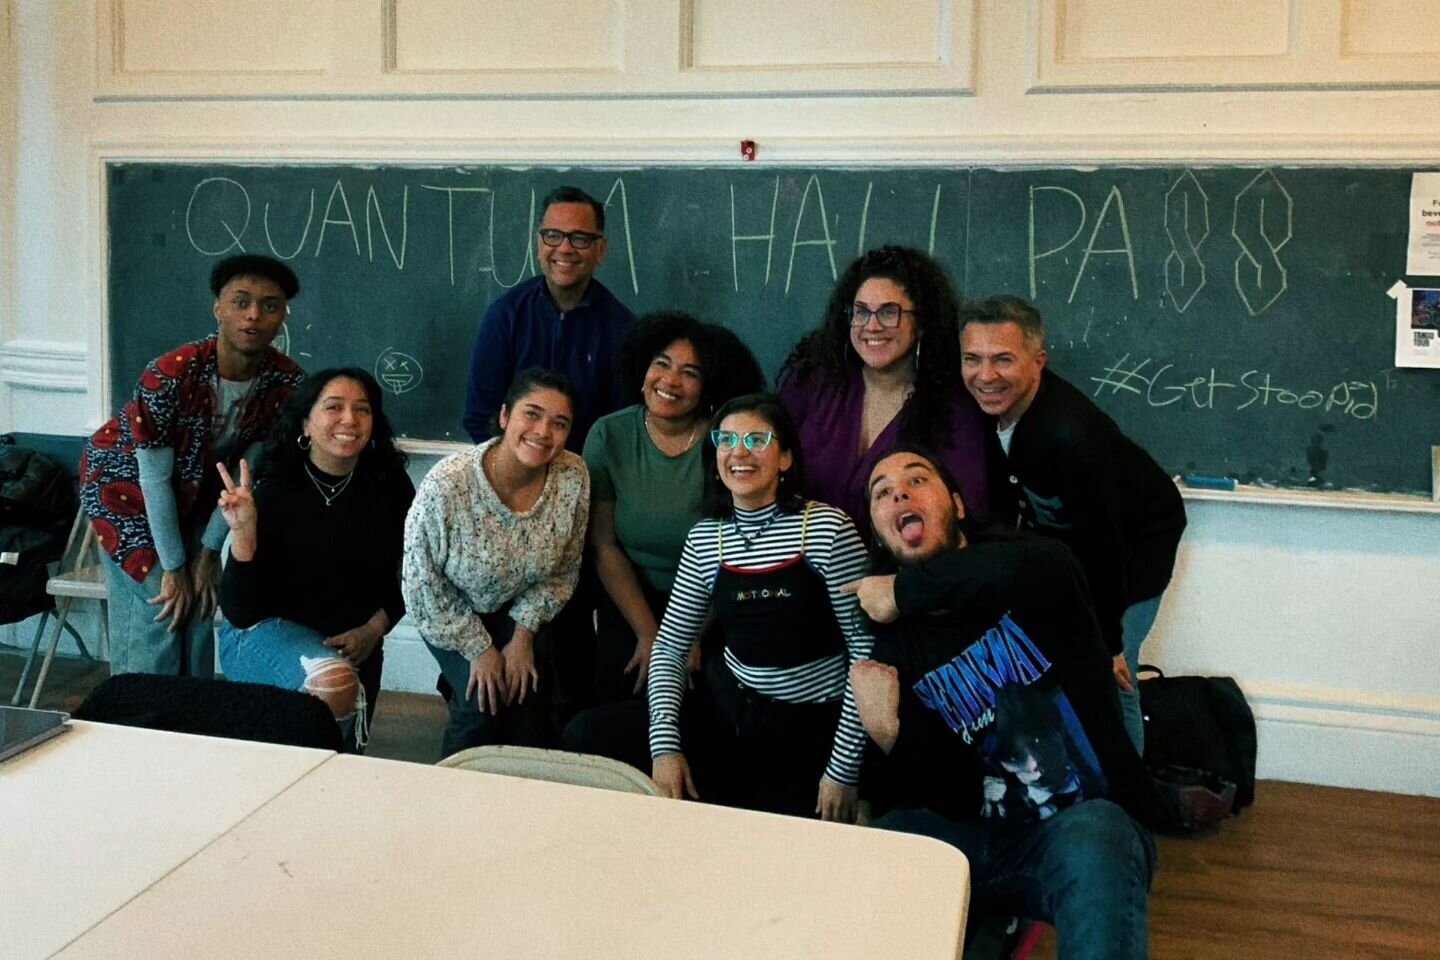 A VERY LATE BUT STILL OVERWHELMINGLY HUGE THANK YOU TO THE SUPERSTARS AT @latinemtlab !!!!! 🥰🤩💫 everyone at the lab and pictured here helped bring Quantum Hall Pass to life !!! It was the final installation of their '23 Table Reading Series &amp; 